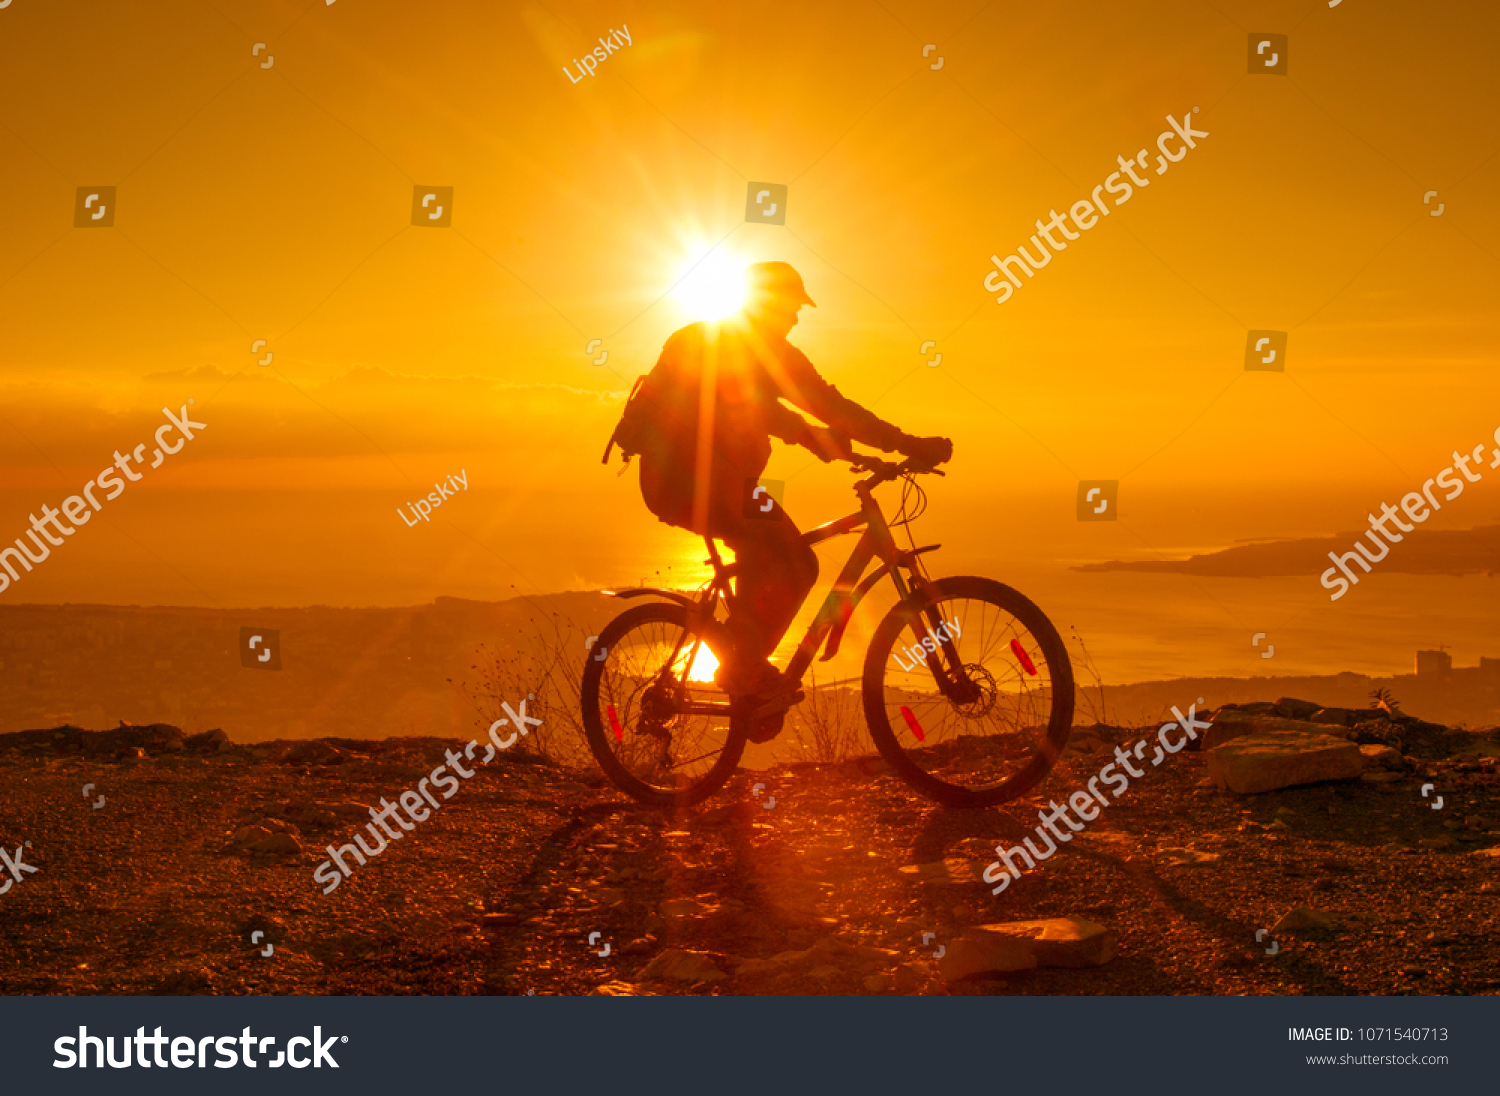 Silhouette of cyclist riding on a bike in mountain at sunset #1071540713